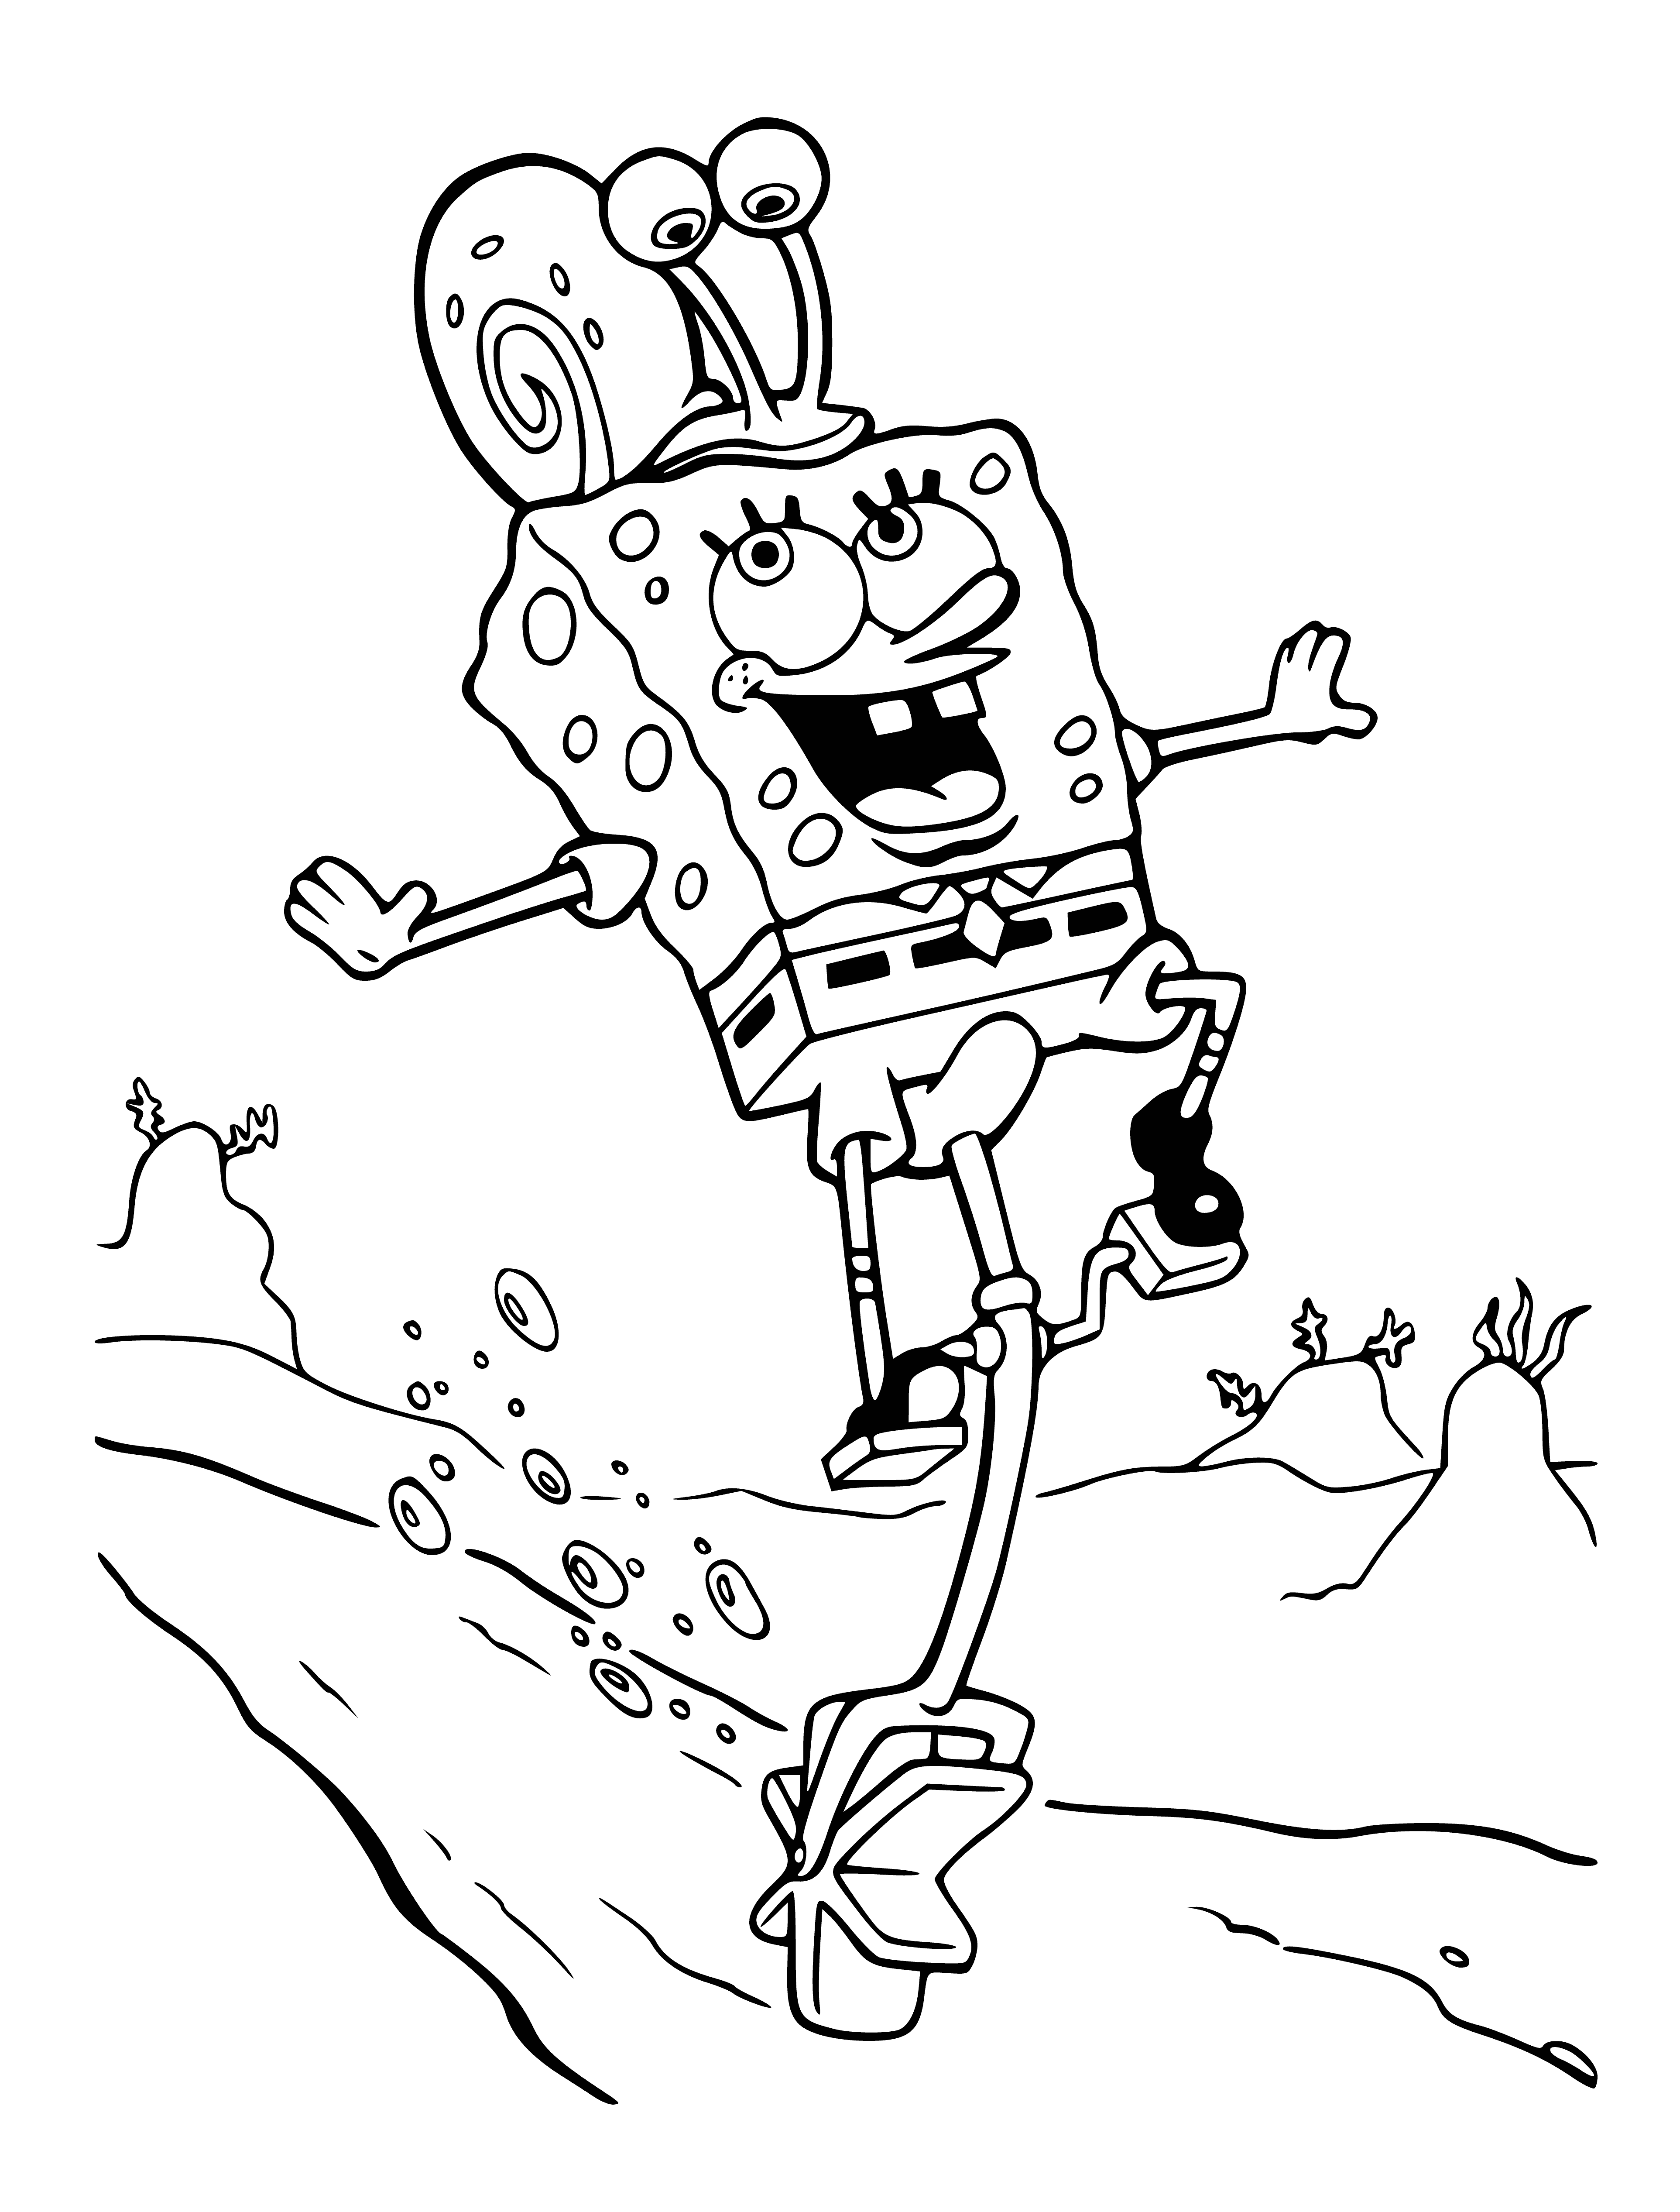 coloring page: Sponge with yellow rectangular body, big blue eyes & thin stick-like arms/legs wearing red square pants & yellow shoes smiling broadly.